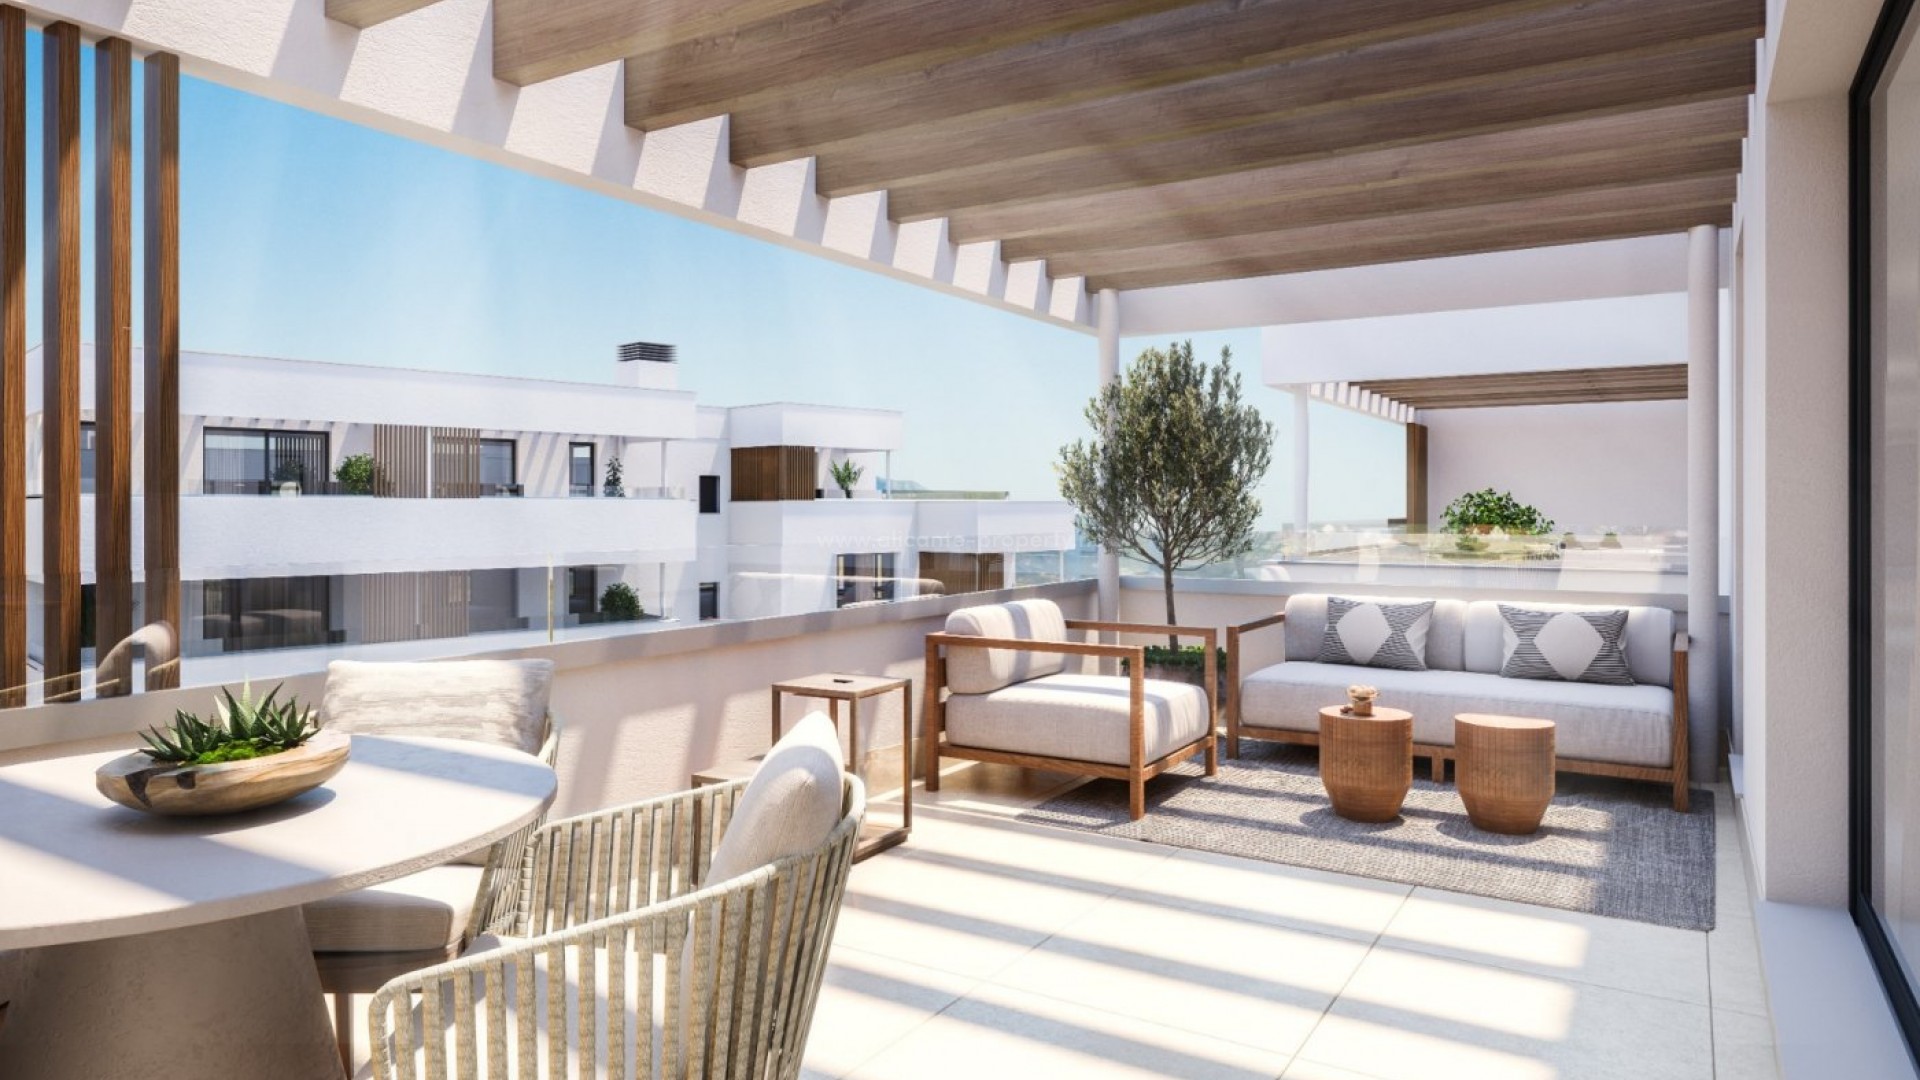 New built apartments in San Juan de Alicante, 2/3 bedrooms, 2 bathrooms, close to beaches, Fantastic communal area with pool, exercise area, clubhouse etc.